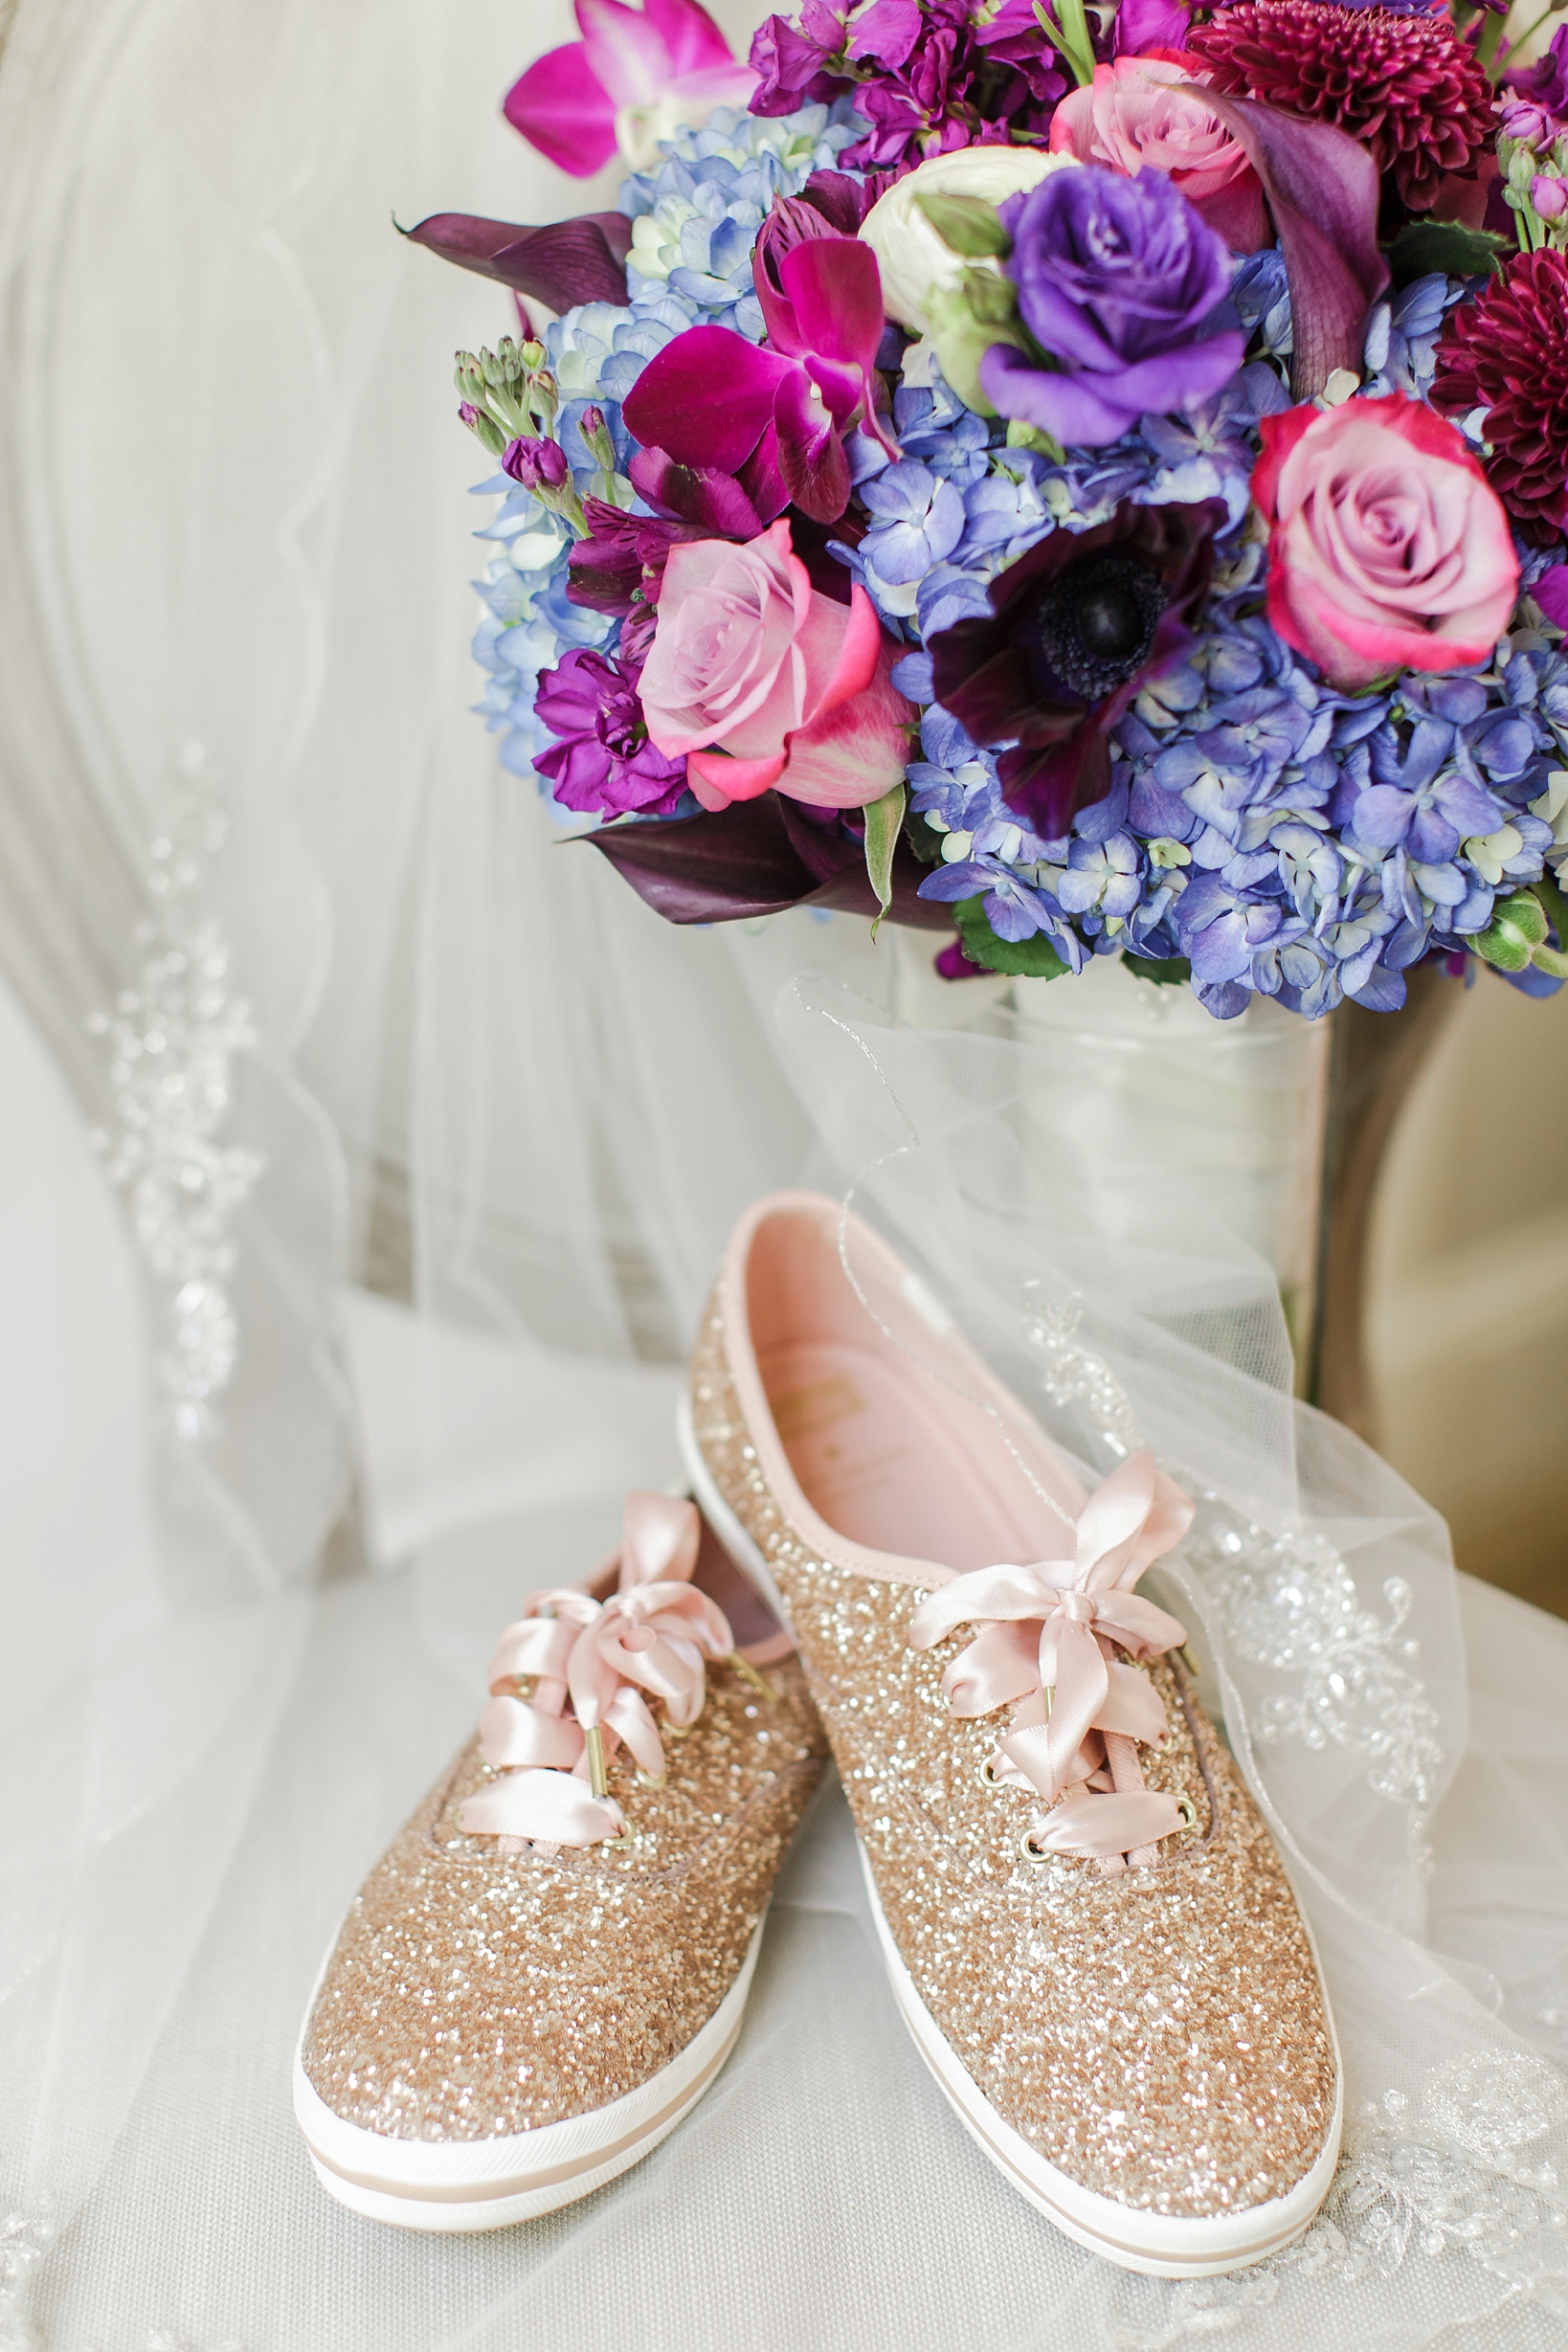 Kate Spade rose gold sneakers with the bride's floral bouquet by Sarah & Ben Photography